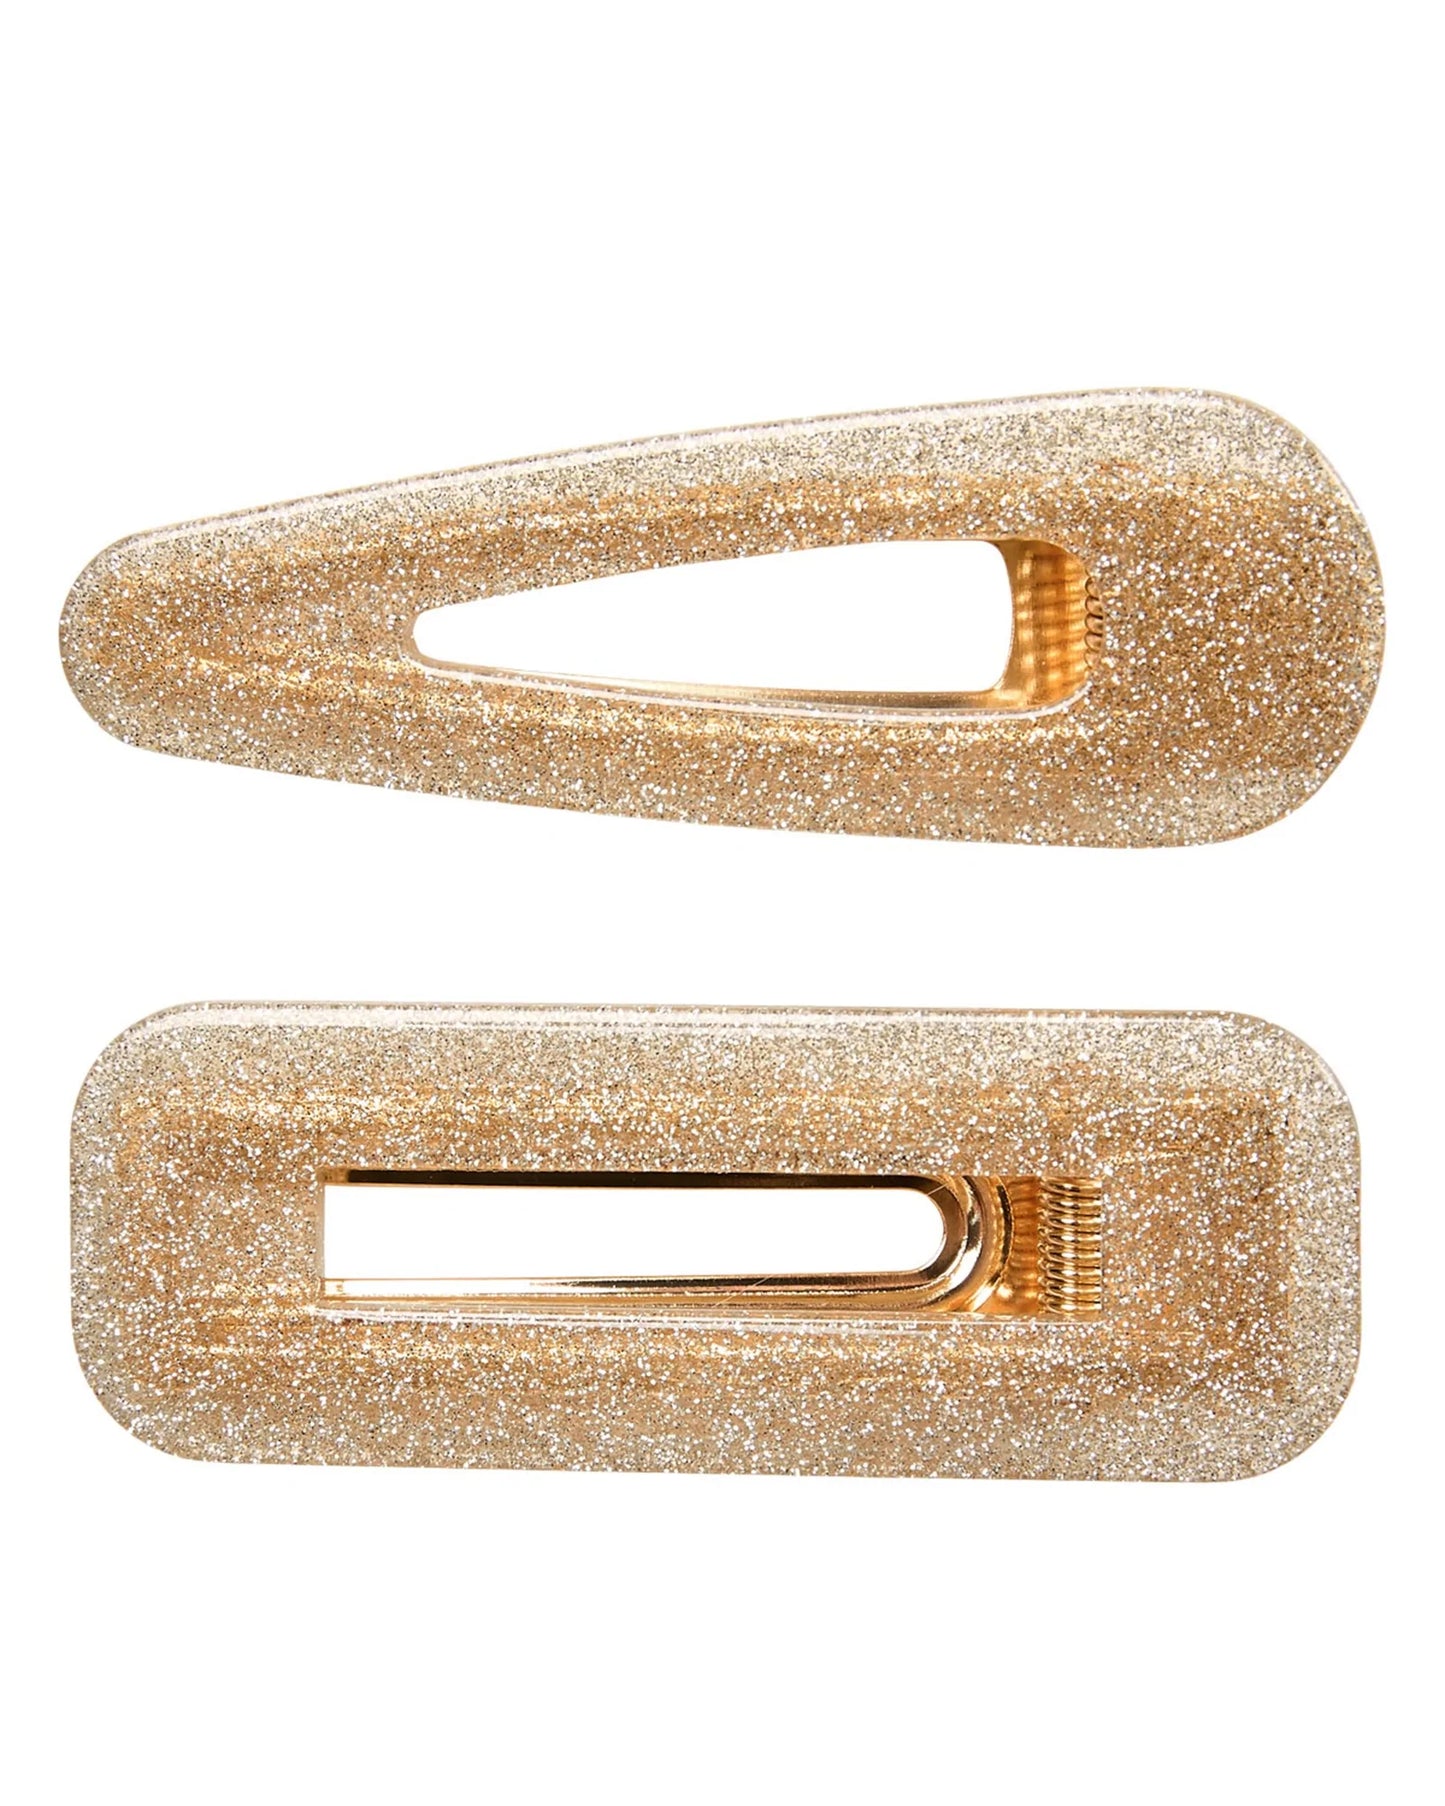 NUSOPHIN hair clip 2-pack Tuscany